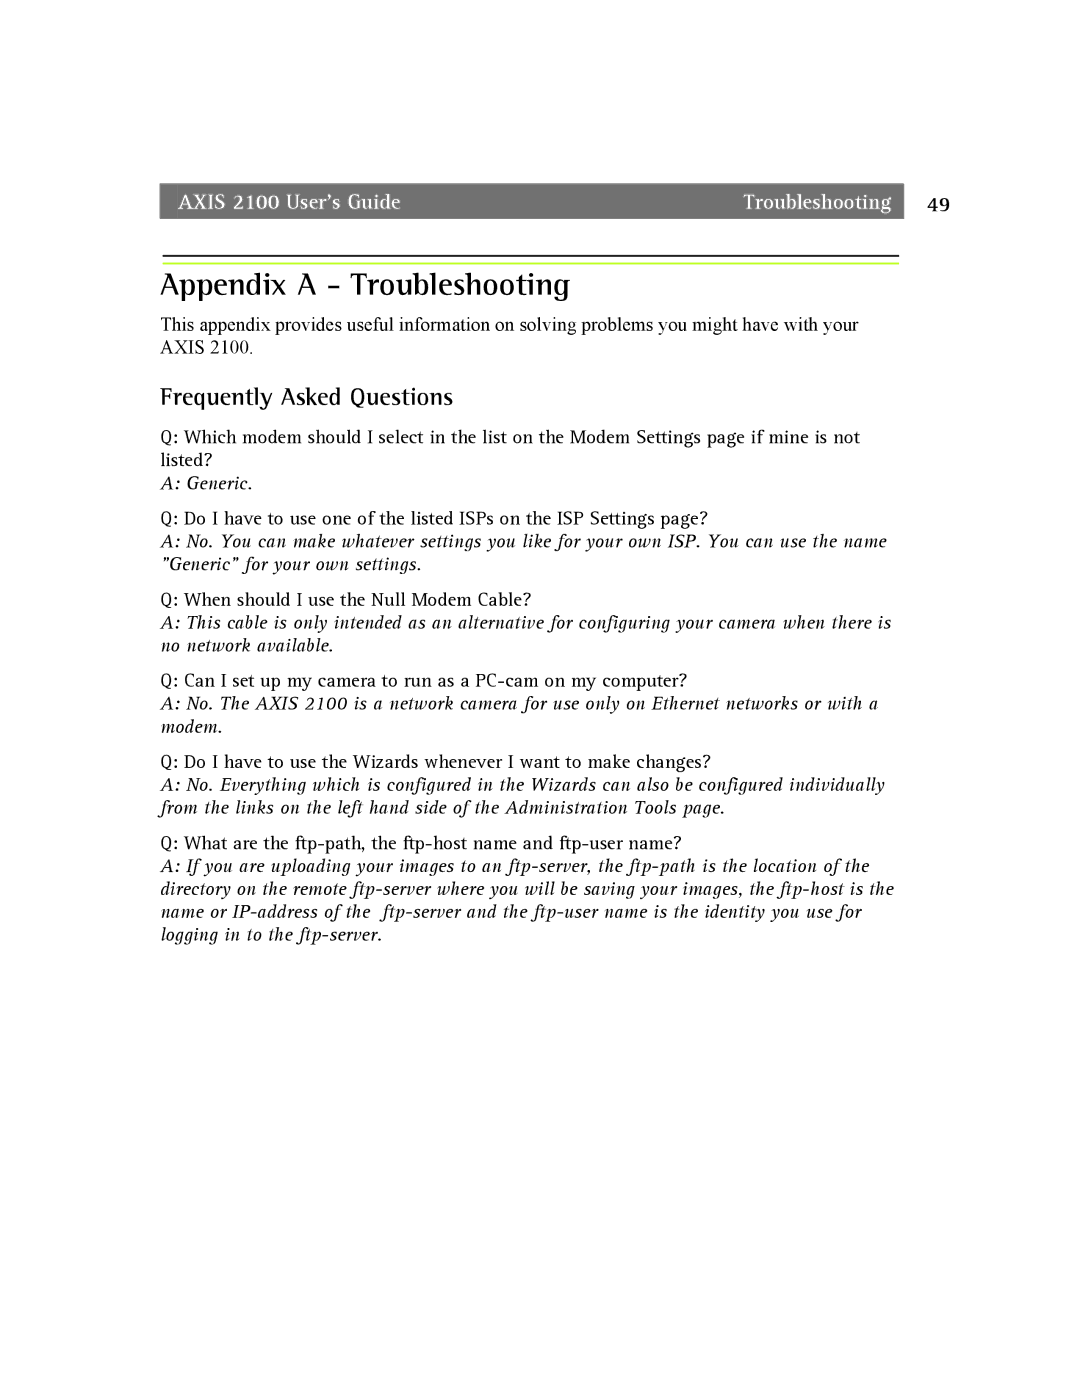 Axis Communications 2100 manual Appendix a Troubleshooting, Frequently Asked Questions 